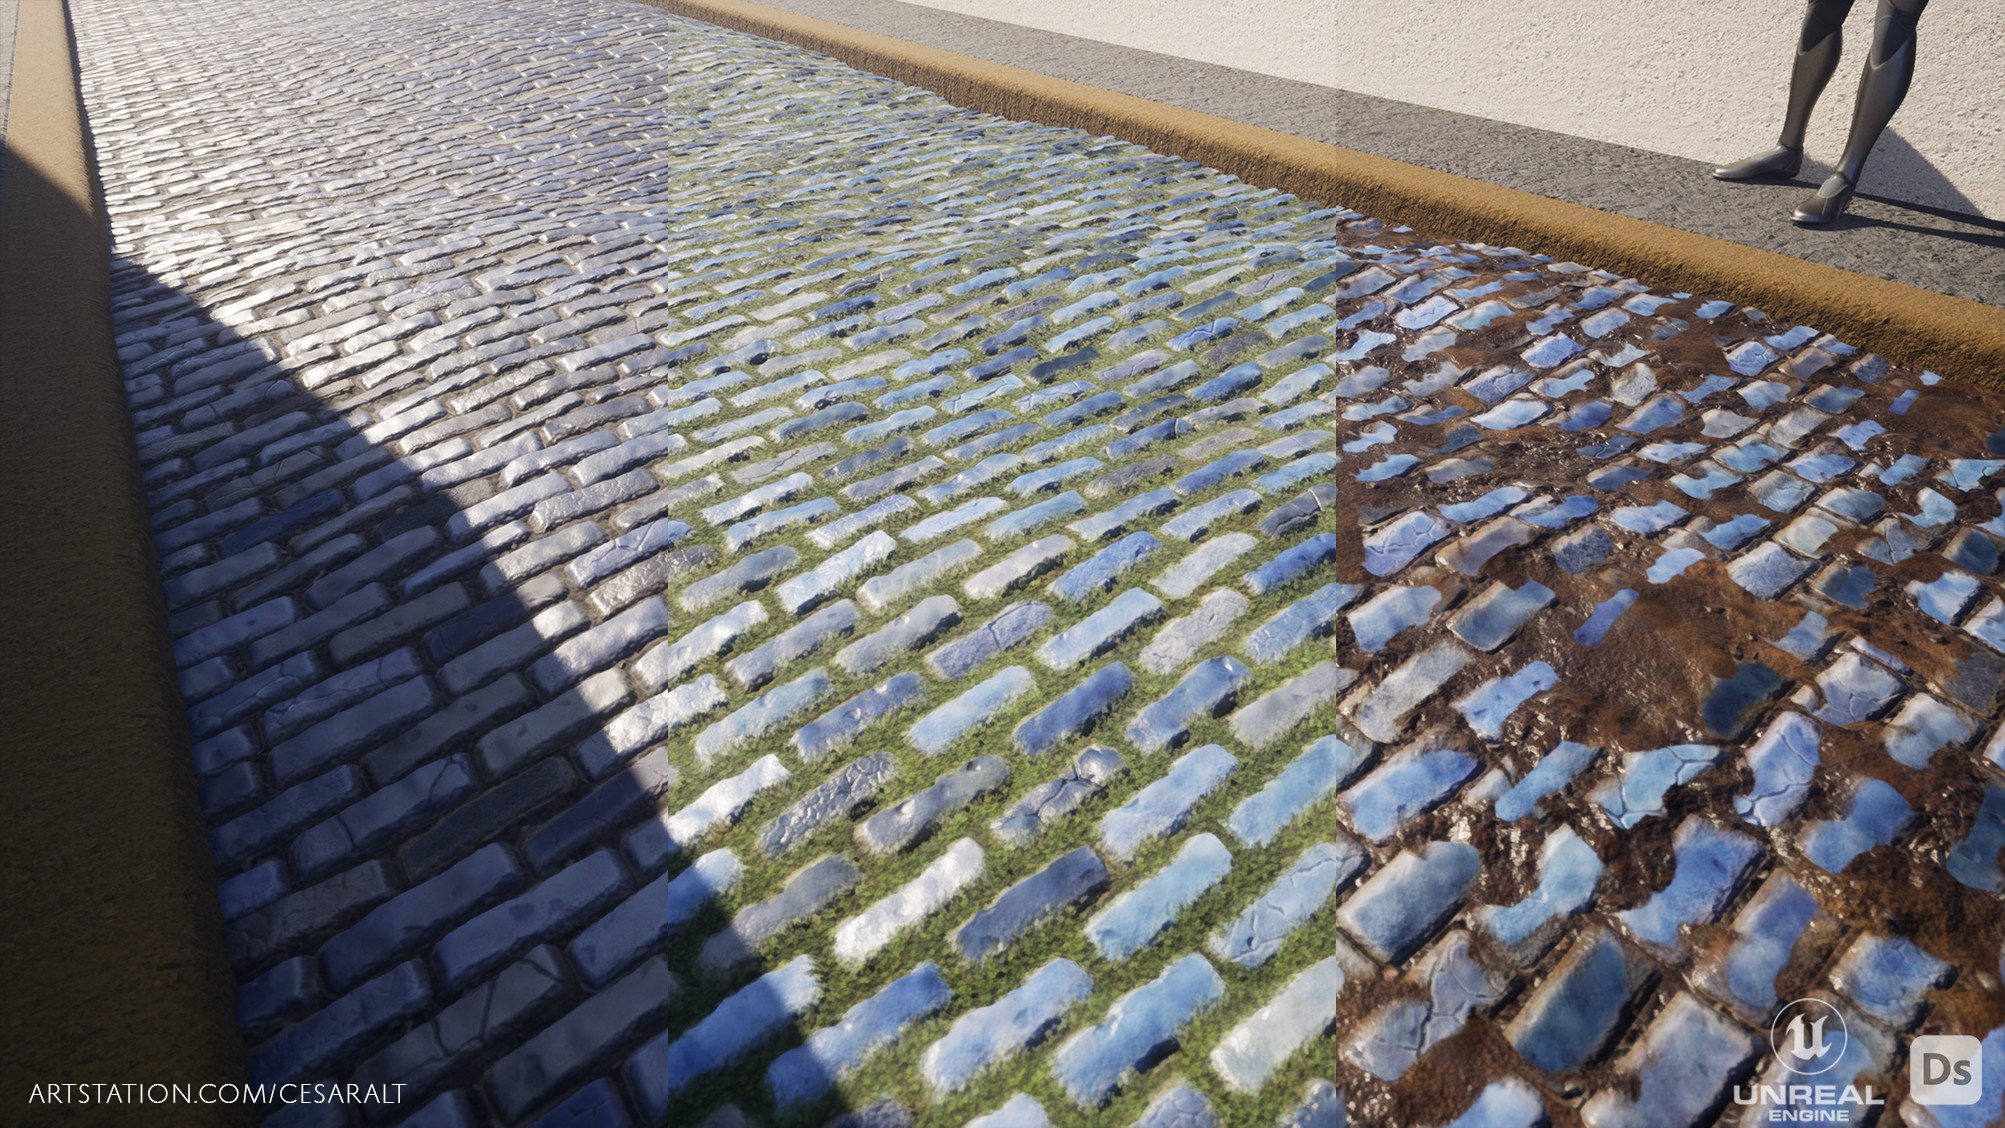 Testing the material in Unreal Engine 5. The exposed parameters within the substance .sbsar file carried over and made the generation of mossy or muddy variants quite easy.